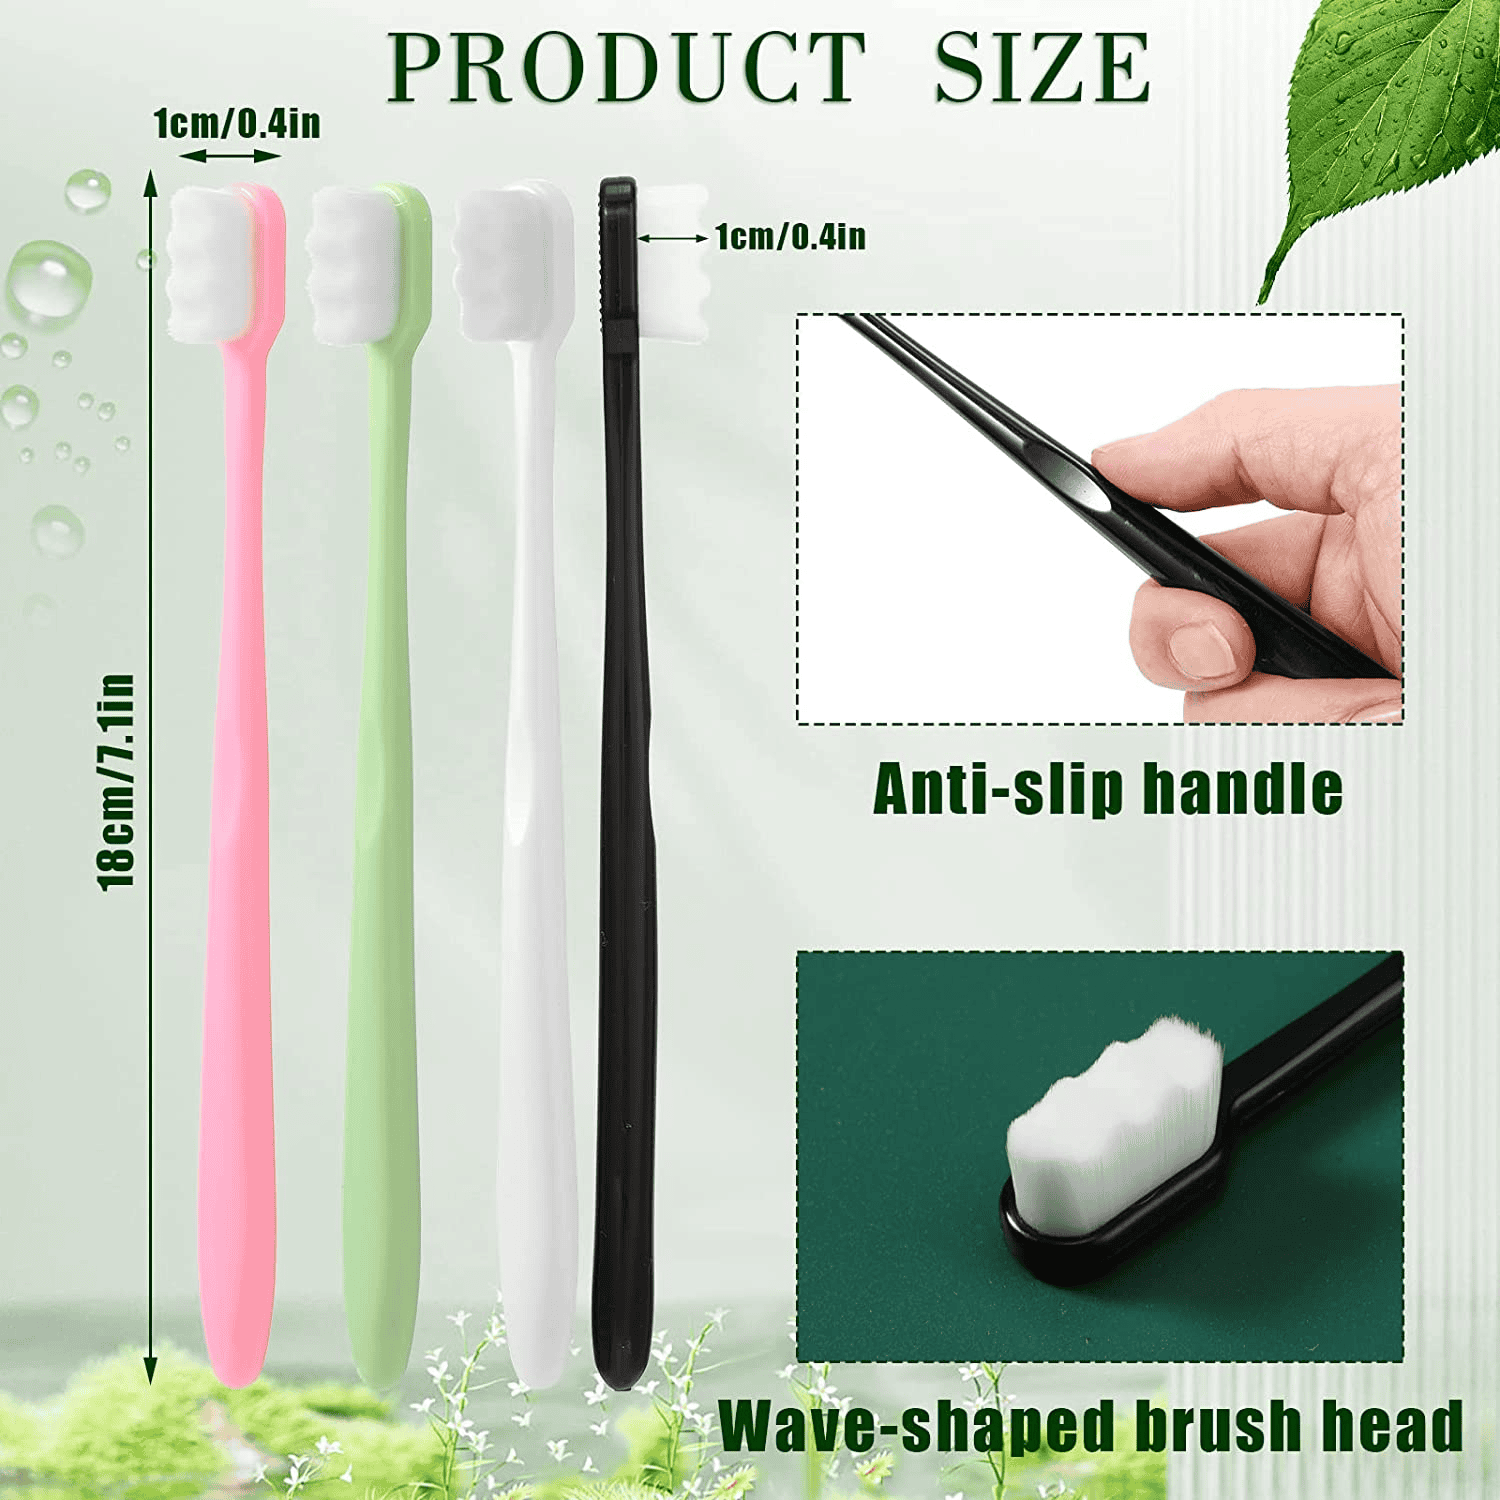 Wave Nano Bristle Toothbrush, Ultra Fine Soft Toothbrush, Oral Hygiene Tools Brush, Manual Dental Oral Care Brush, Adult Teeth Cleaning Toothbrush, Million Nano Bristle Teeth Cleaning Tool, Soft Floss Toothbrush Bristles for Sensitive Gums